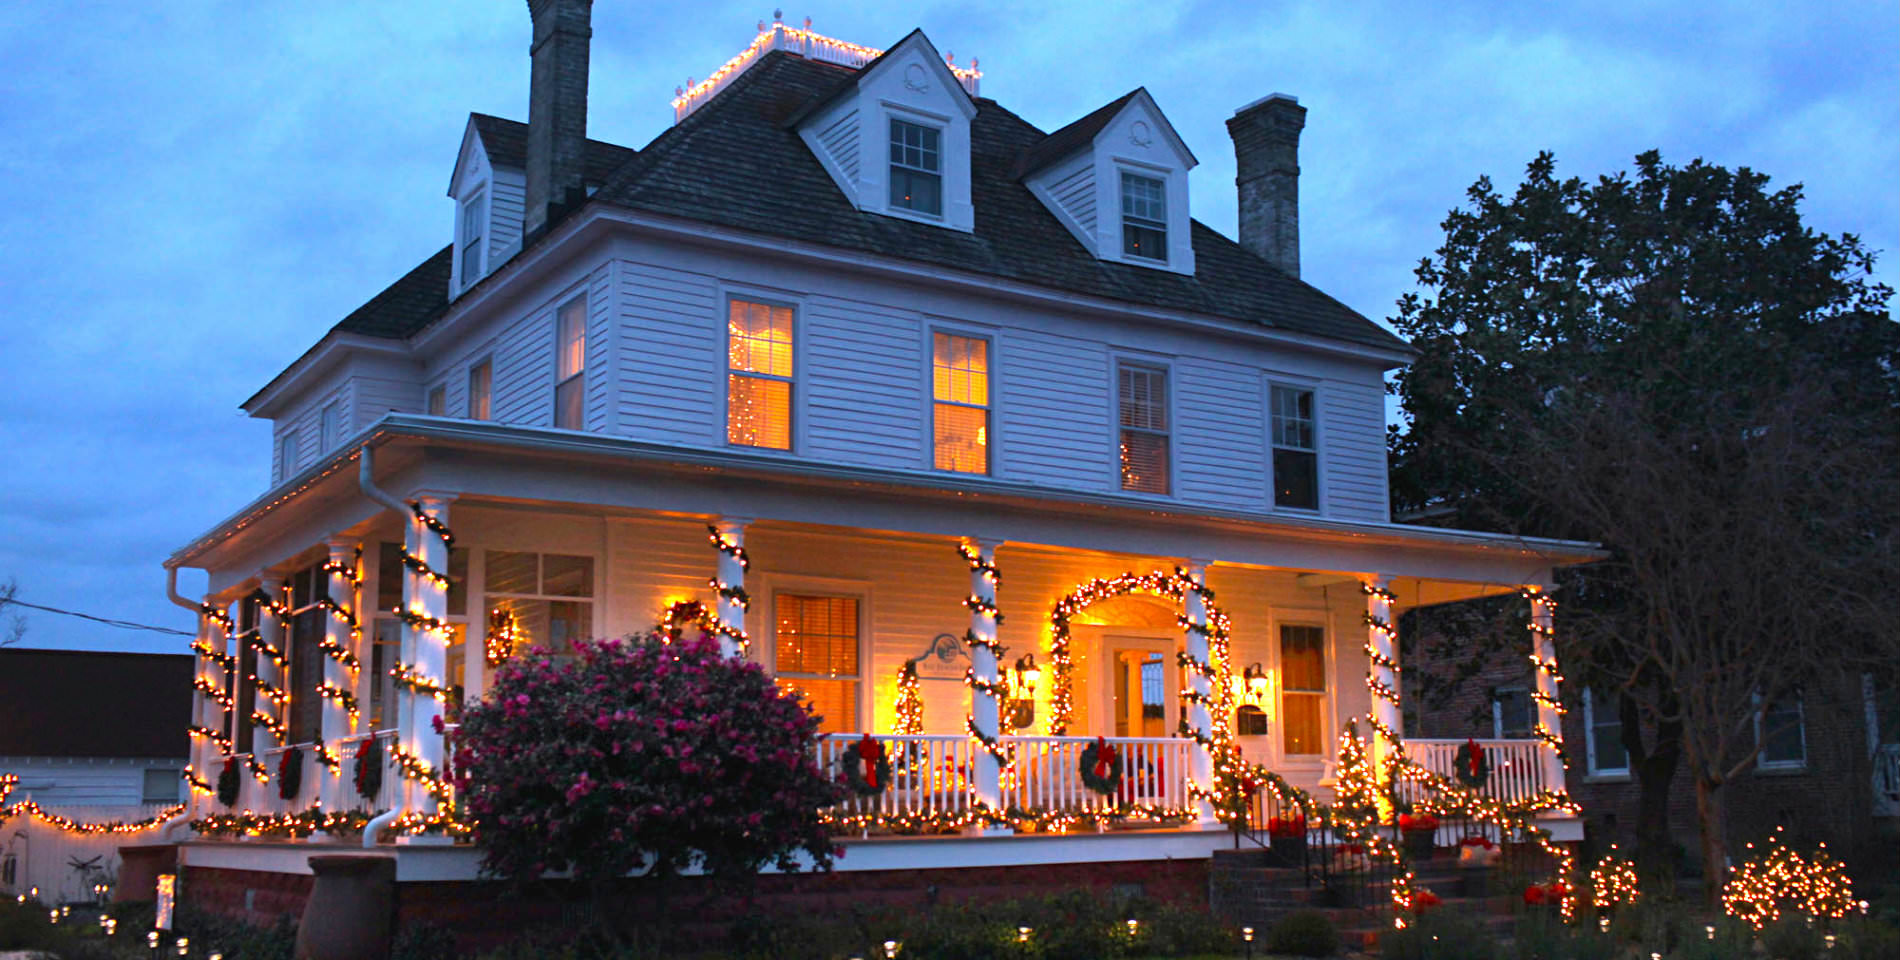 The post's of the Inn's front porch decorated with festive lights, the indoor lights glow warm from inside. 